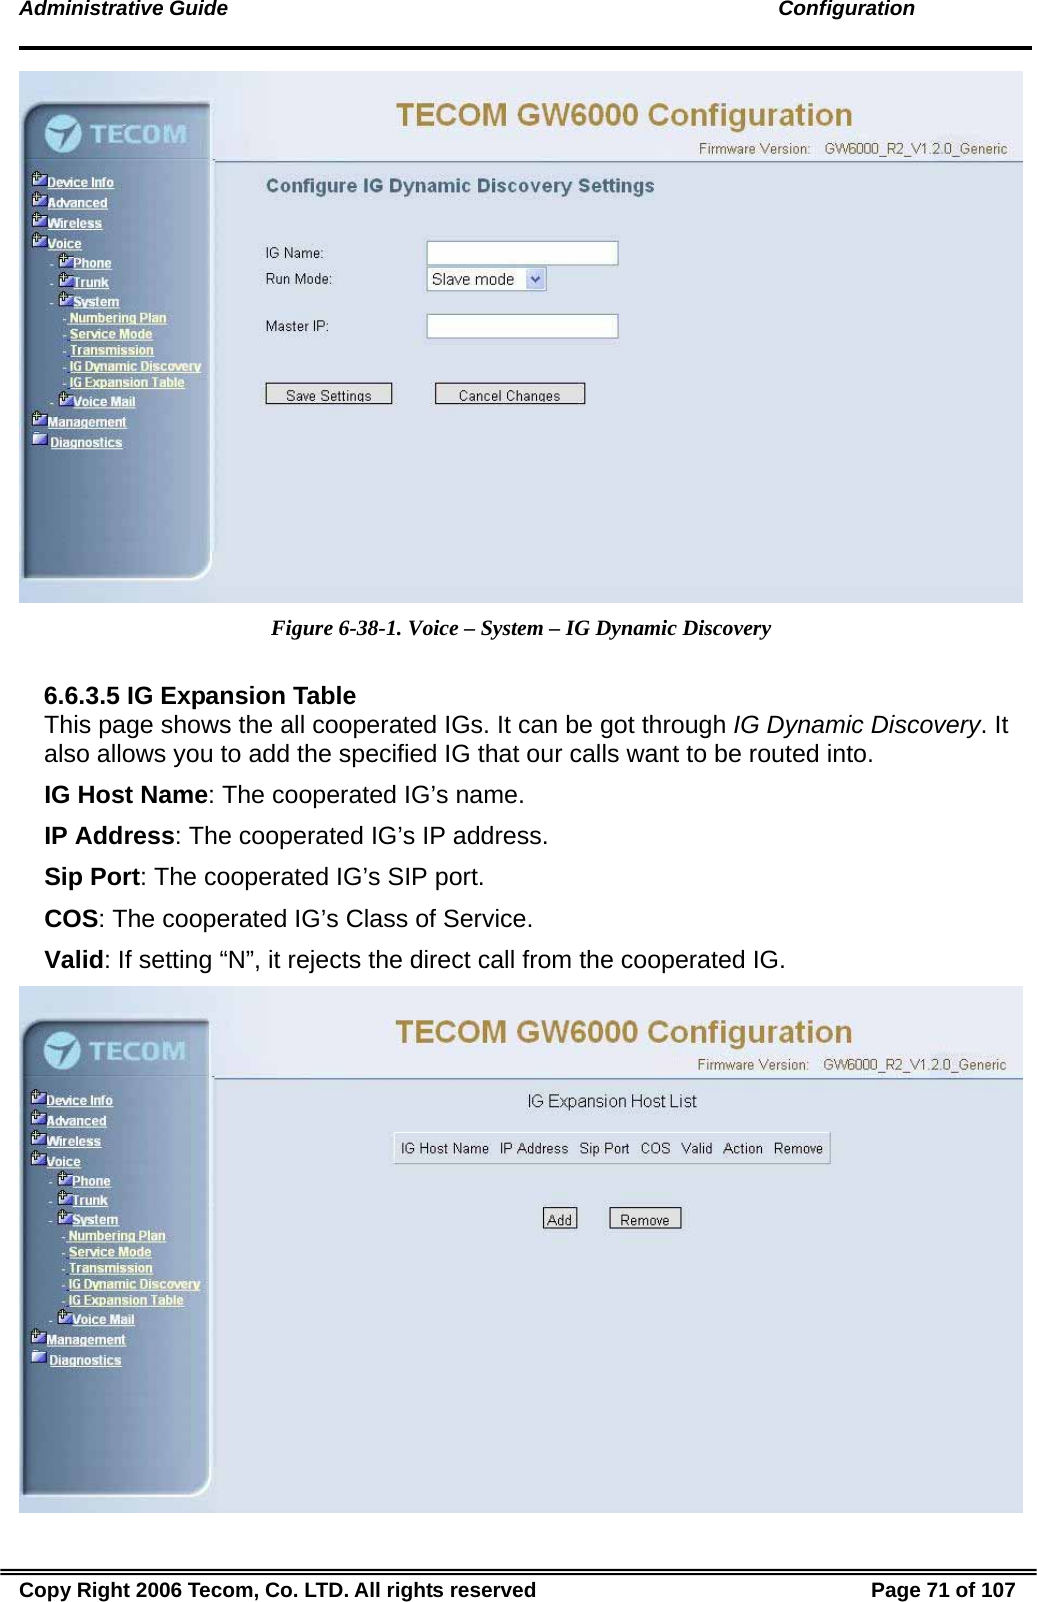 Administrative Guide                                                                                               Configuration  Figure 6-38-1. Voice – System – IG Dynamic Discovery  6.6.3.5 IG Expansion Table This page shows the all cooperated IGs. It can be got through IG Dynamic Discovery. It also allows you to add the specified IG that our calls want to be routed into. IG Host Name: The cooperated IG’s name. IP Address: The cooperated IG’s IP address. Sip Port: The cooperated IG’s SIP port. COS: The cooperated IG’s Class of Service. Valid: If setting “N”, it rejects the direct call from the cooperated IG.  Copy Right 2006 Tecom, Co. LTD. All rights reserved  Page 71 of 107 